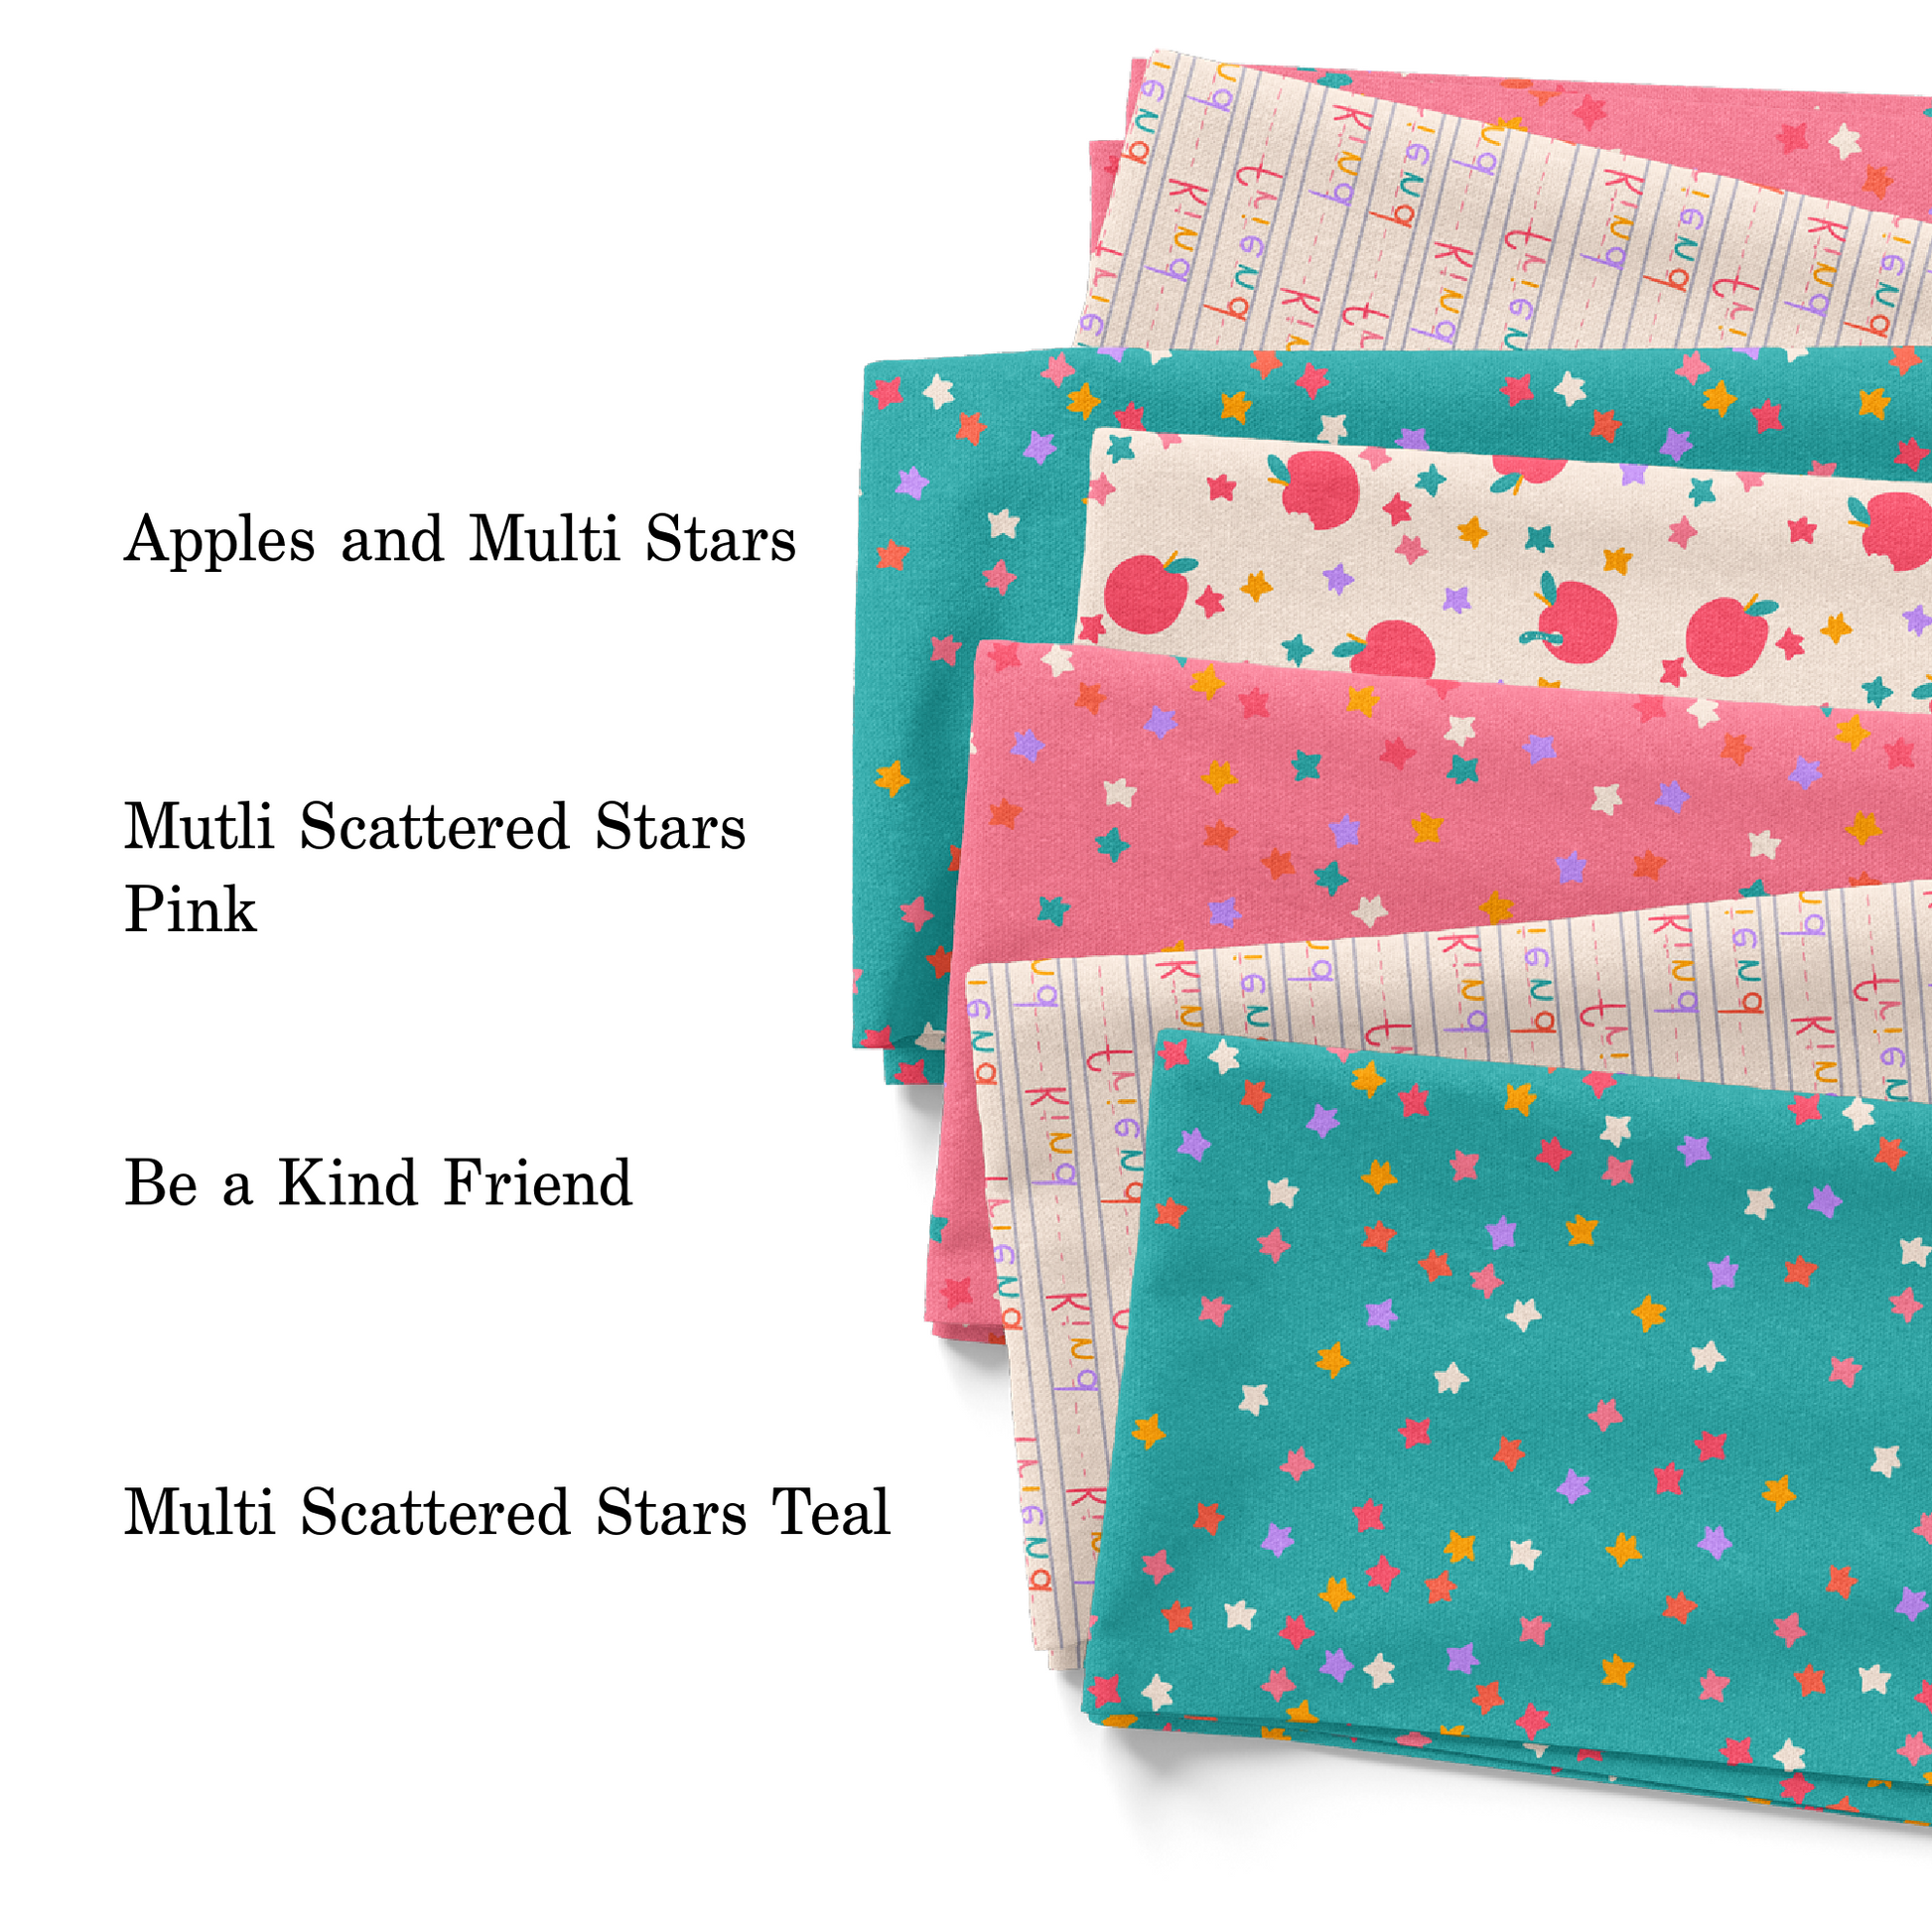 Wild Daisy 2023 back to school collection with stars, apples, and lined paper patterns.